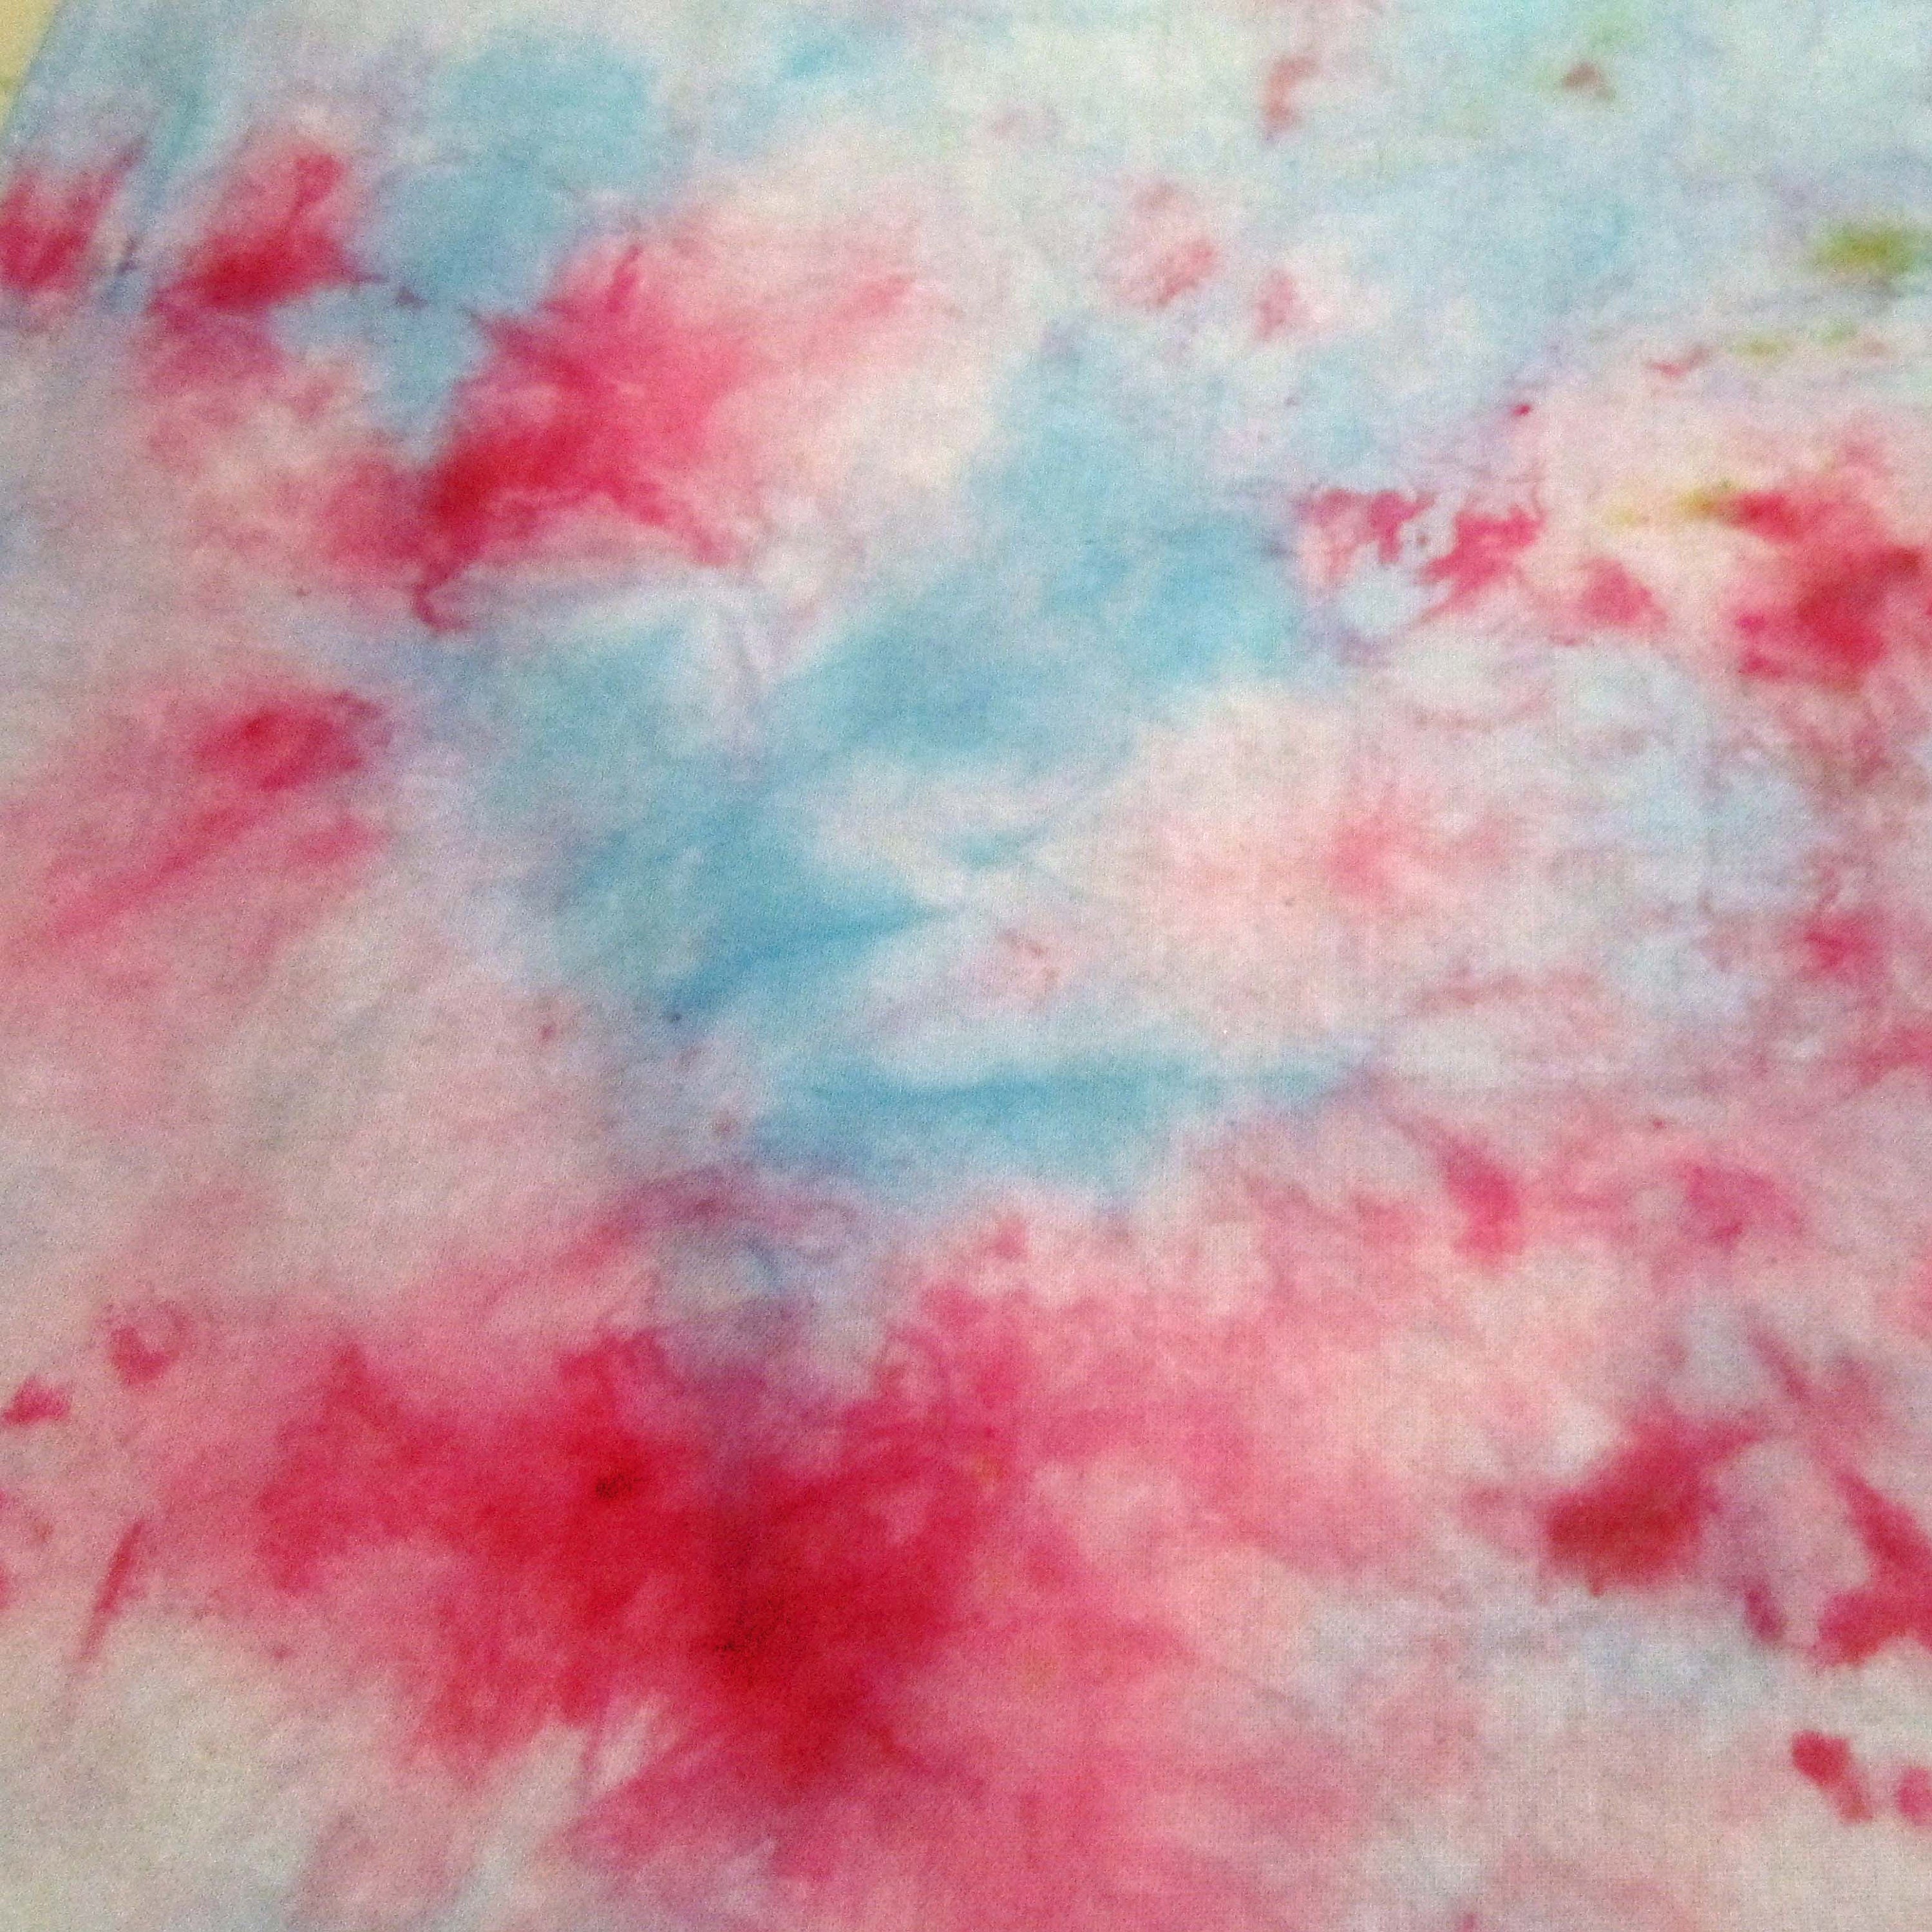 Blue Sky With Red Fireworks Bandana Hand Dyed Cotton - Etsy